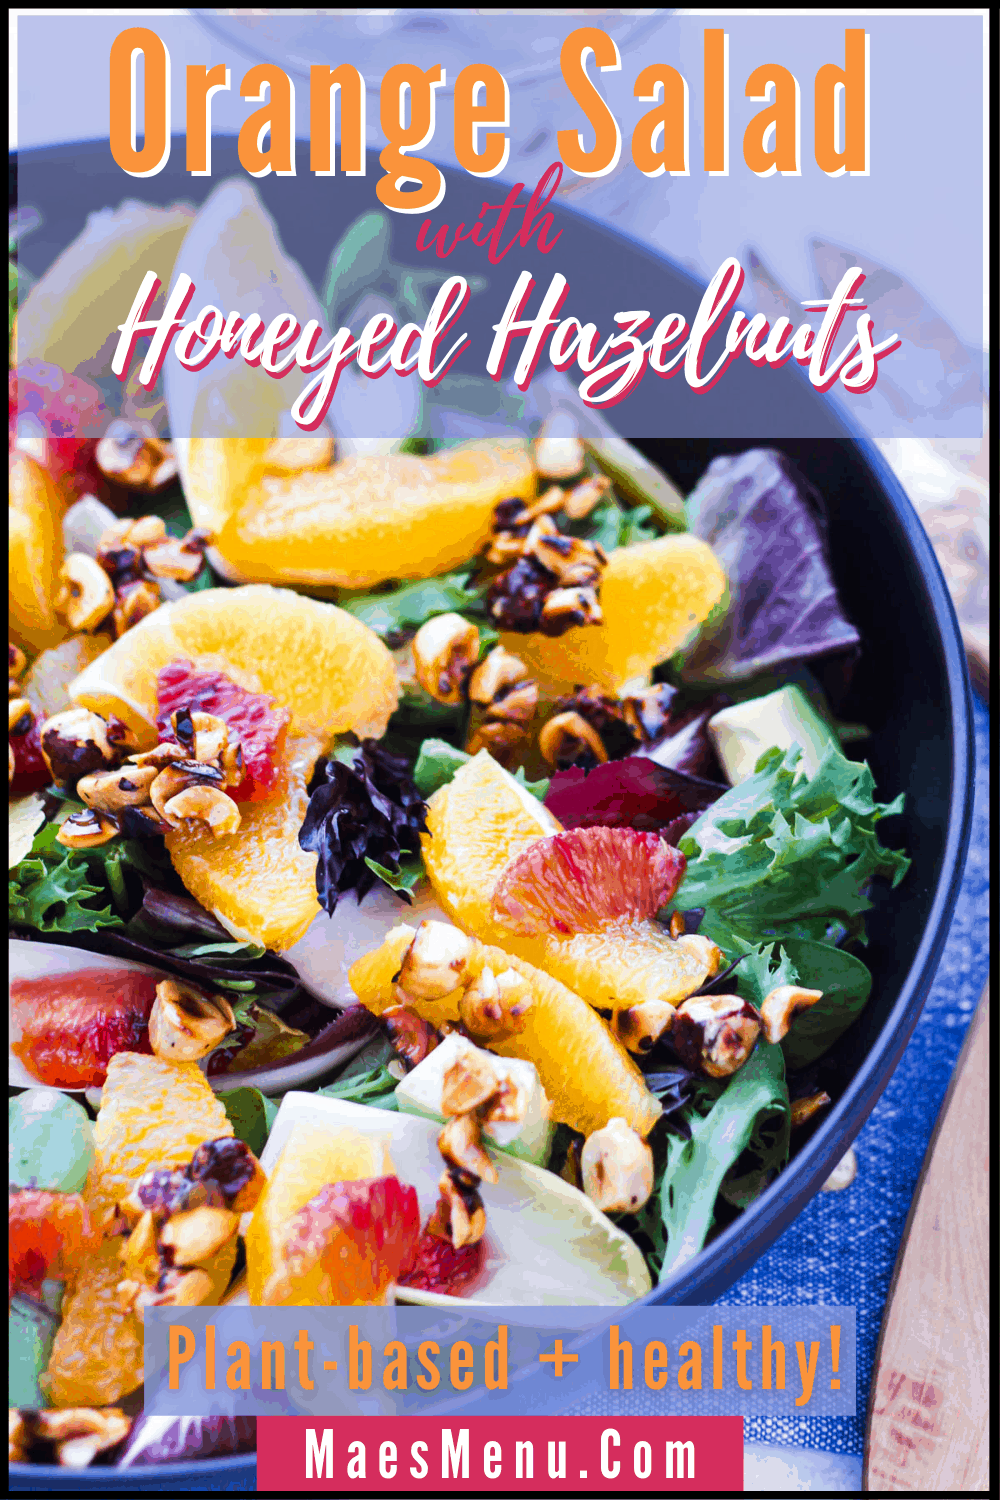 A pinterest pin for orange salad with honeyed hazelnuts. On the image is an angled overhead image of the salad in a black bowl